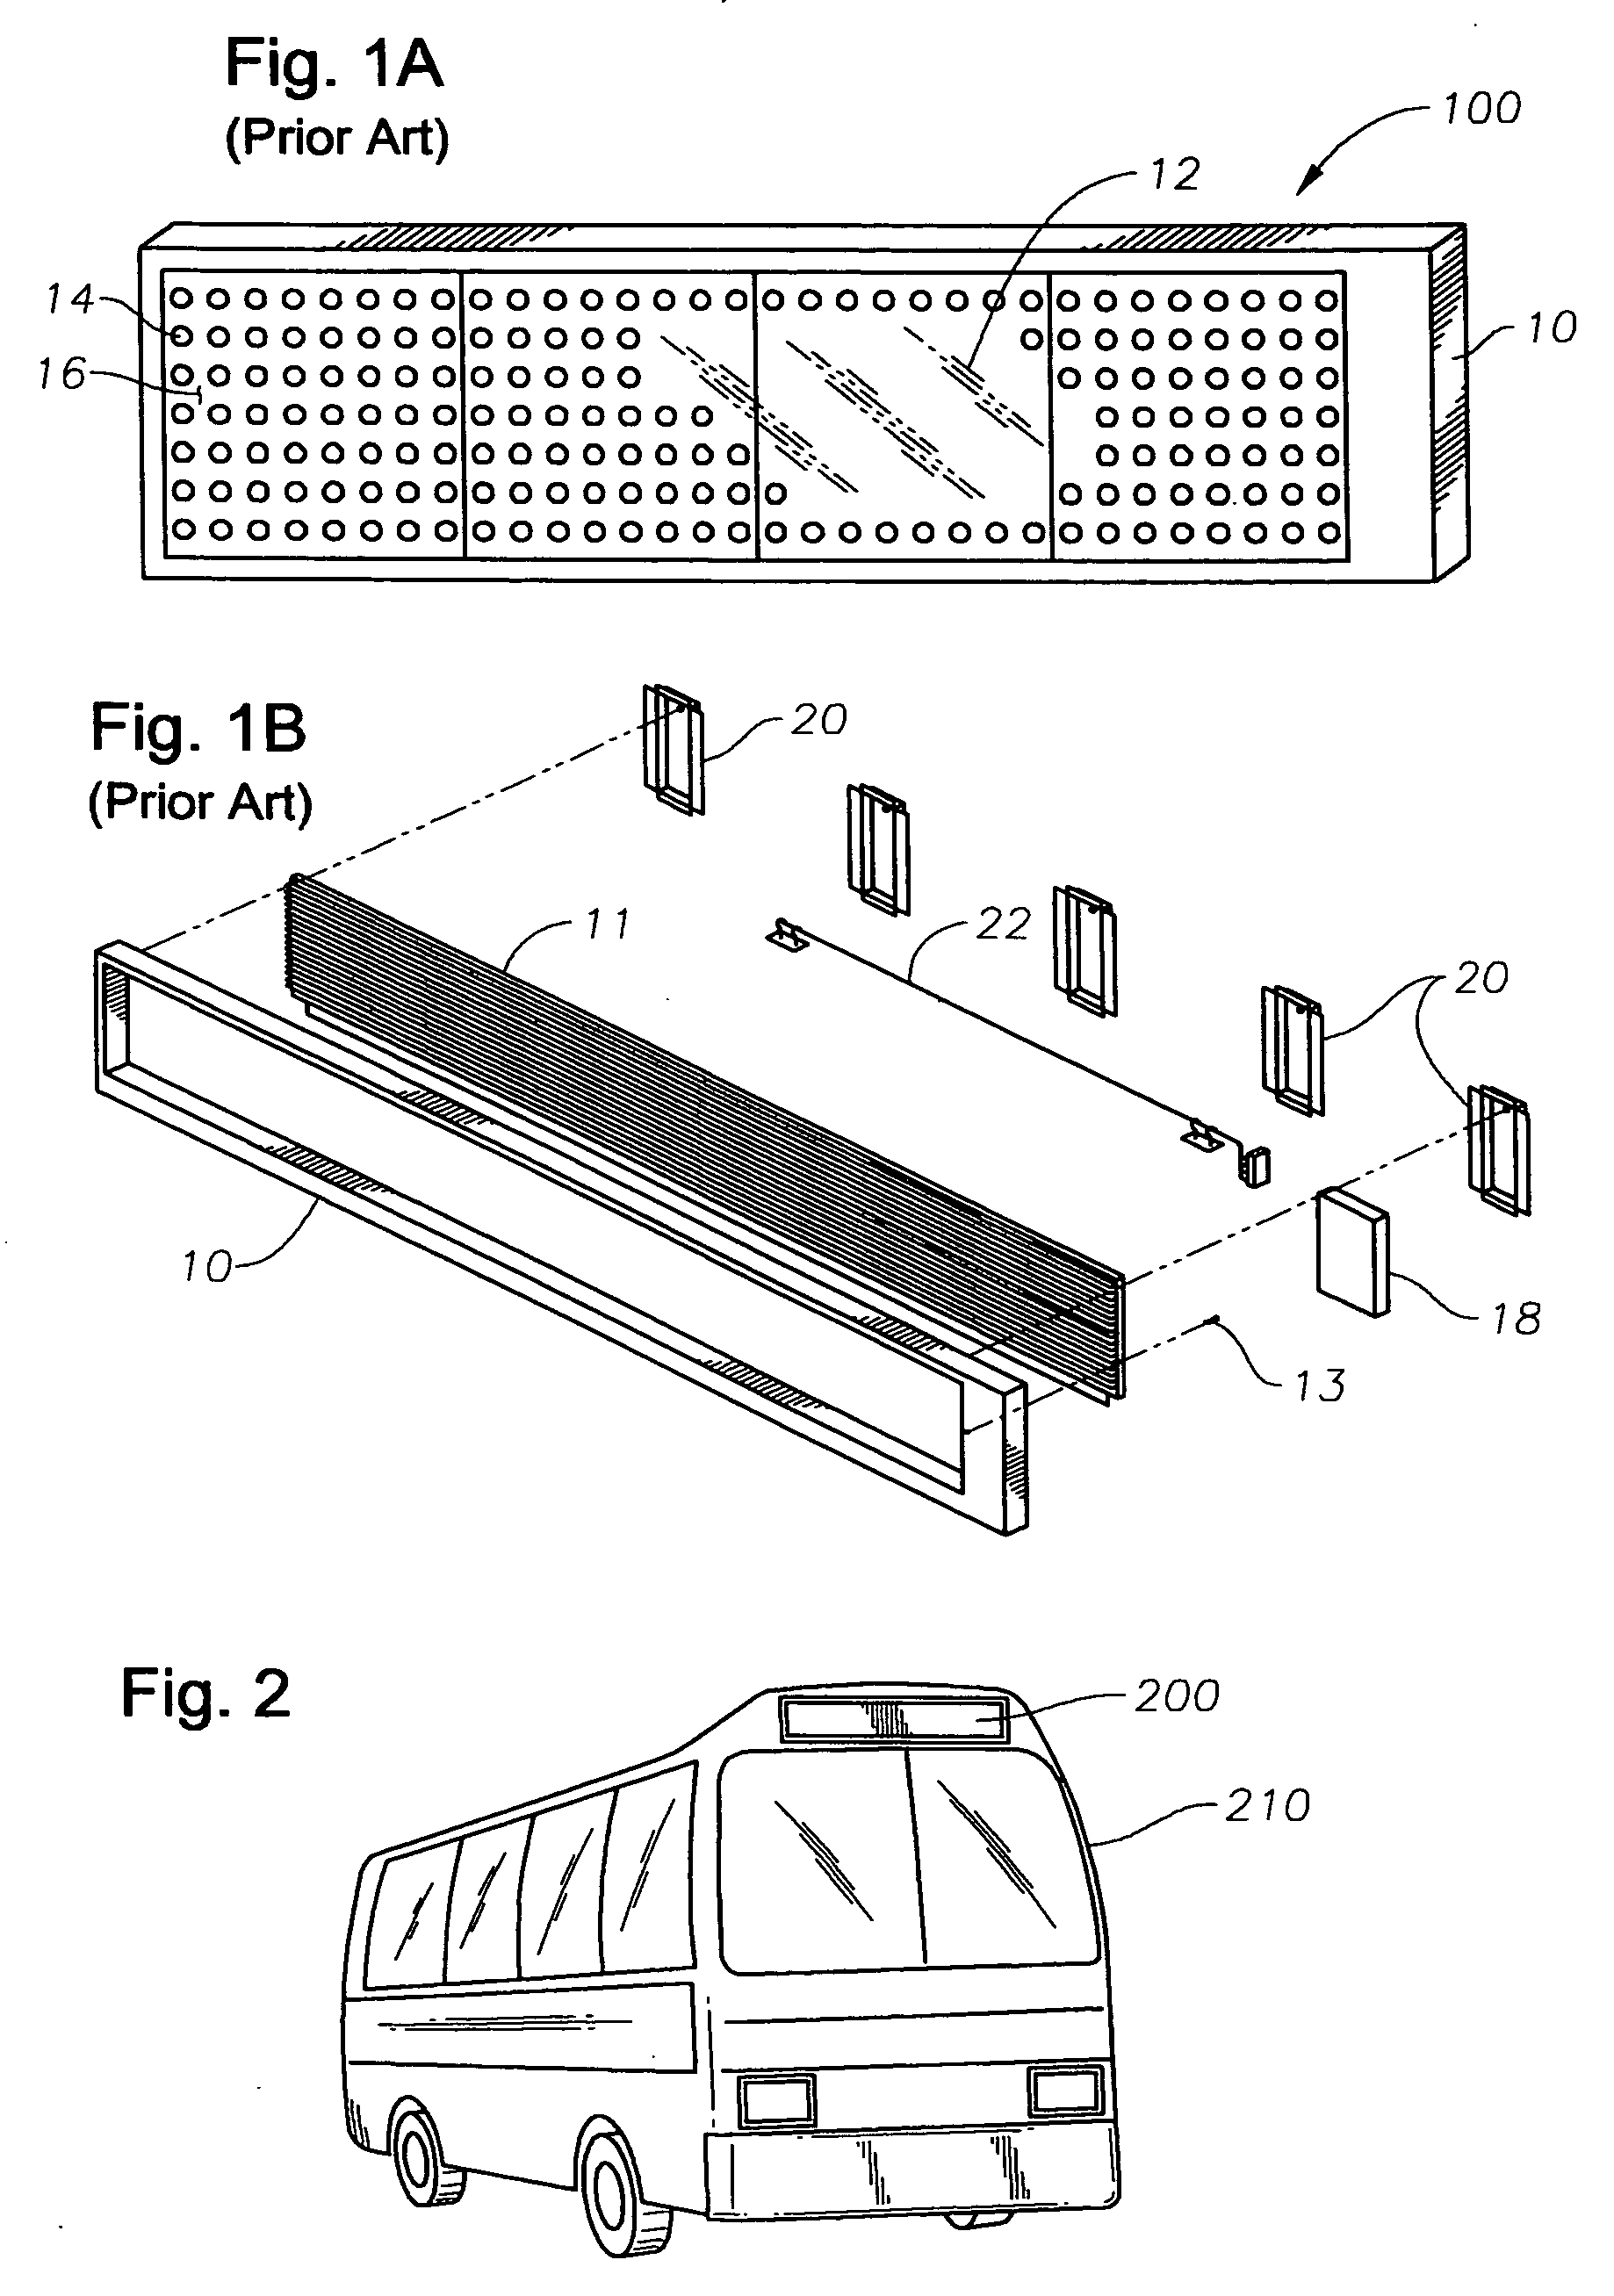 Display device with rail support